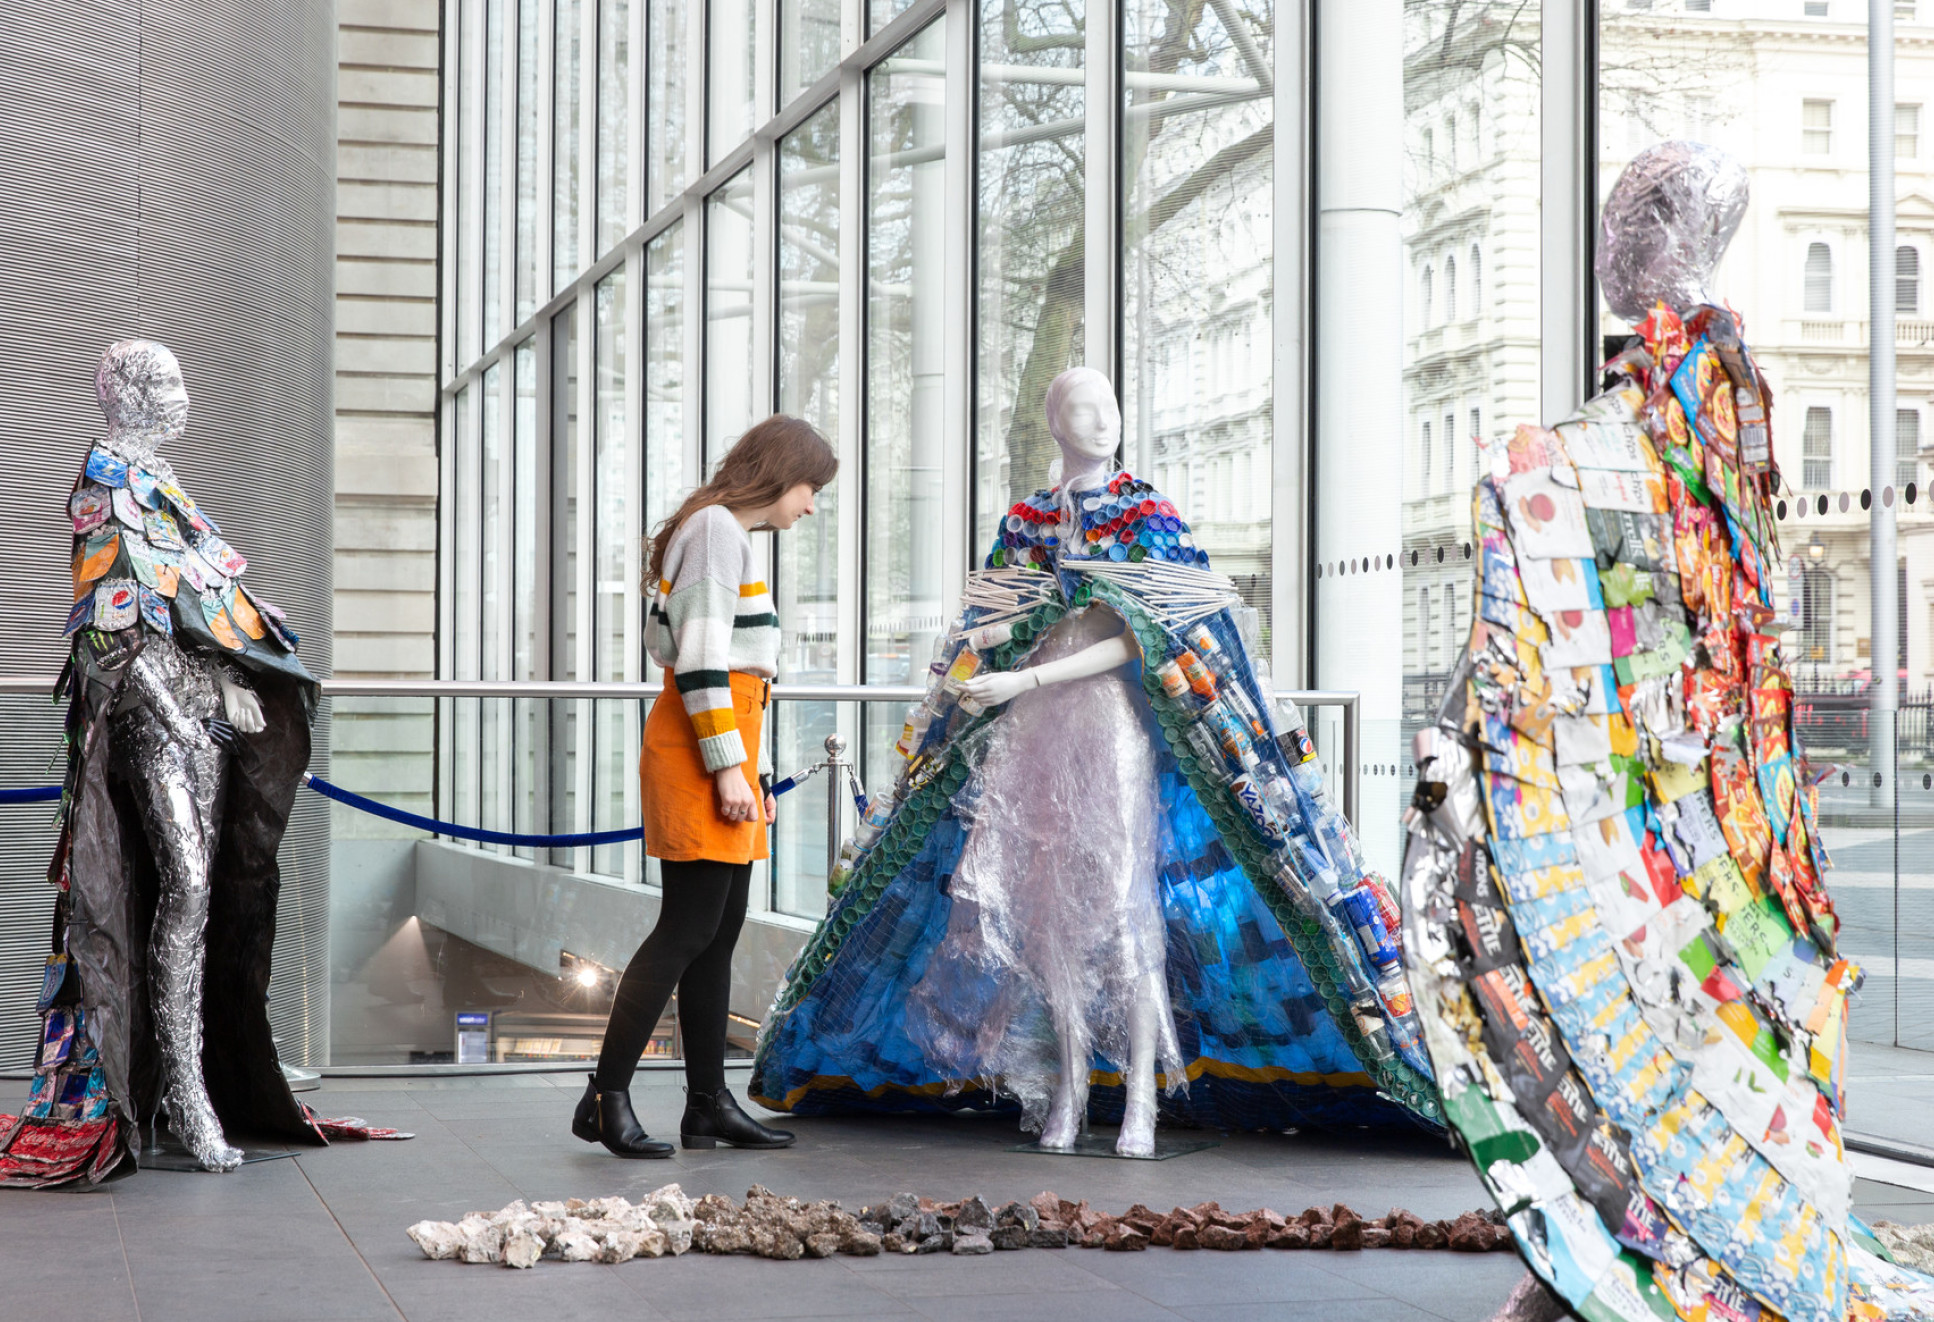 Exhibition shows three manequins wearing long trailing cloaks made from street litter. One made from plastic drinks bottles and aluminium cans, with a dress wrap of cling film, another made from colourful crisp packets. A young white woman with long brown wavy hair wearing an orange skirt and jumper  is looking closely at one.